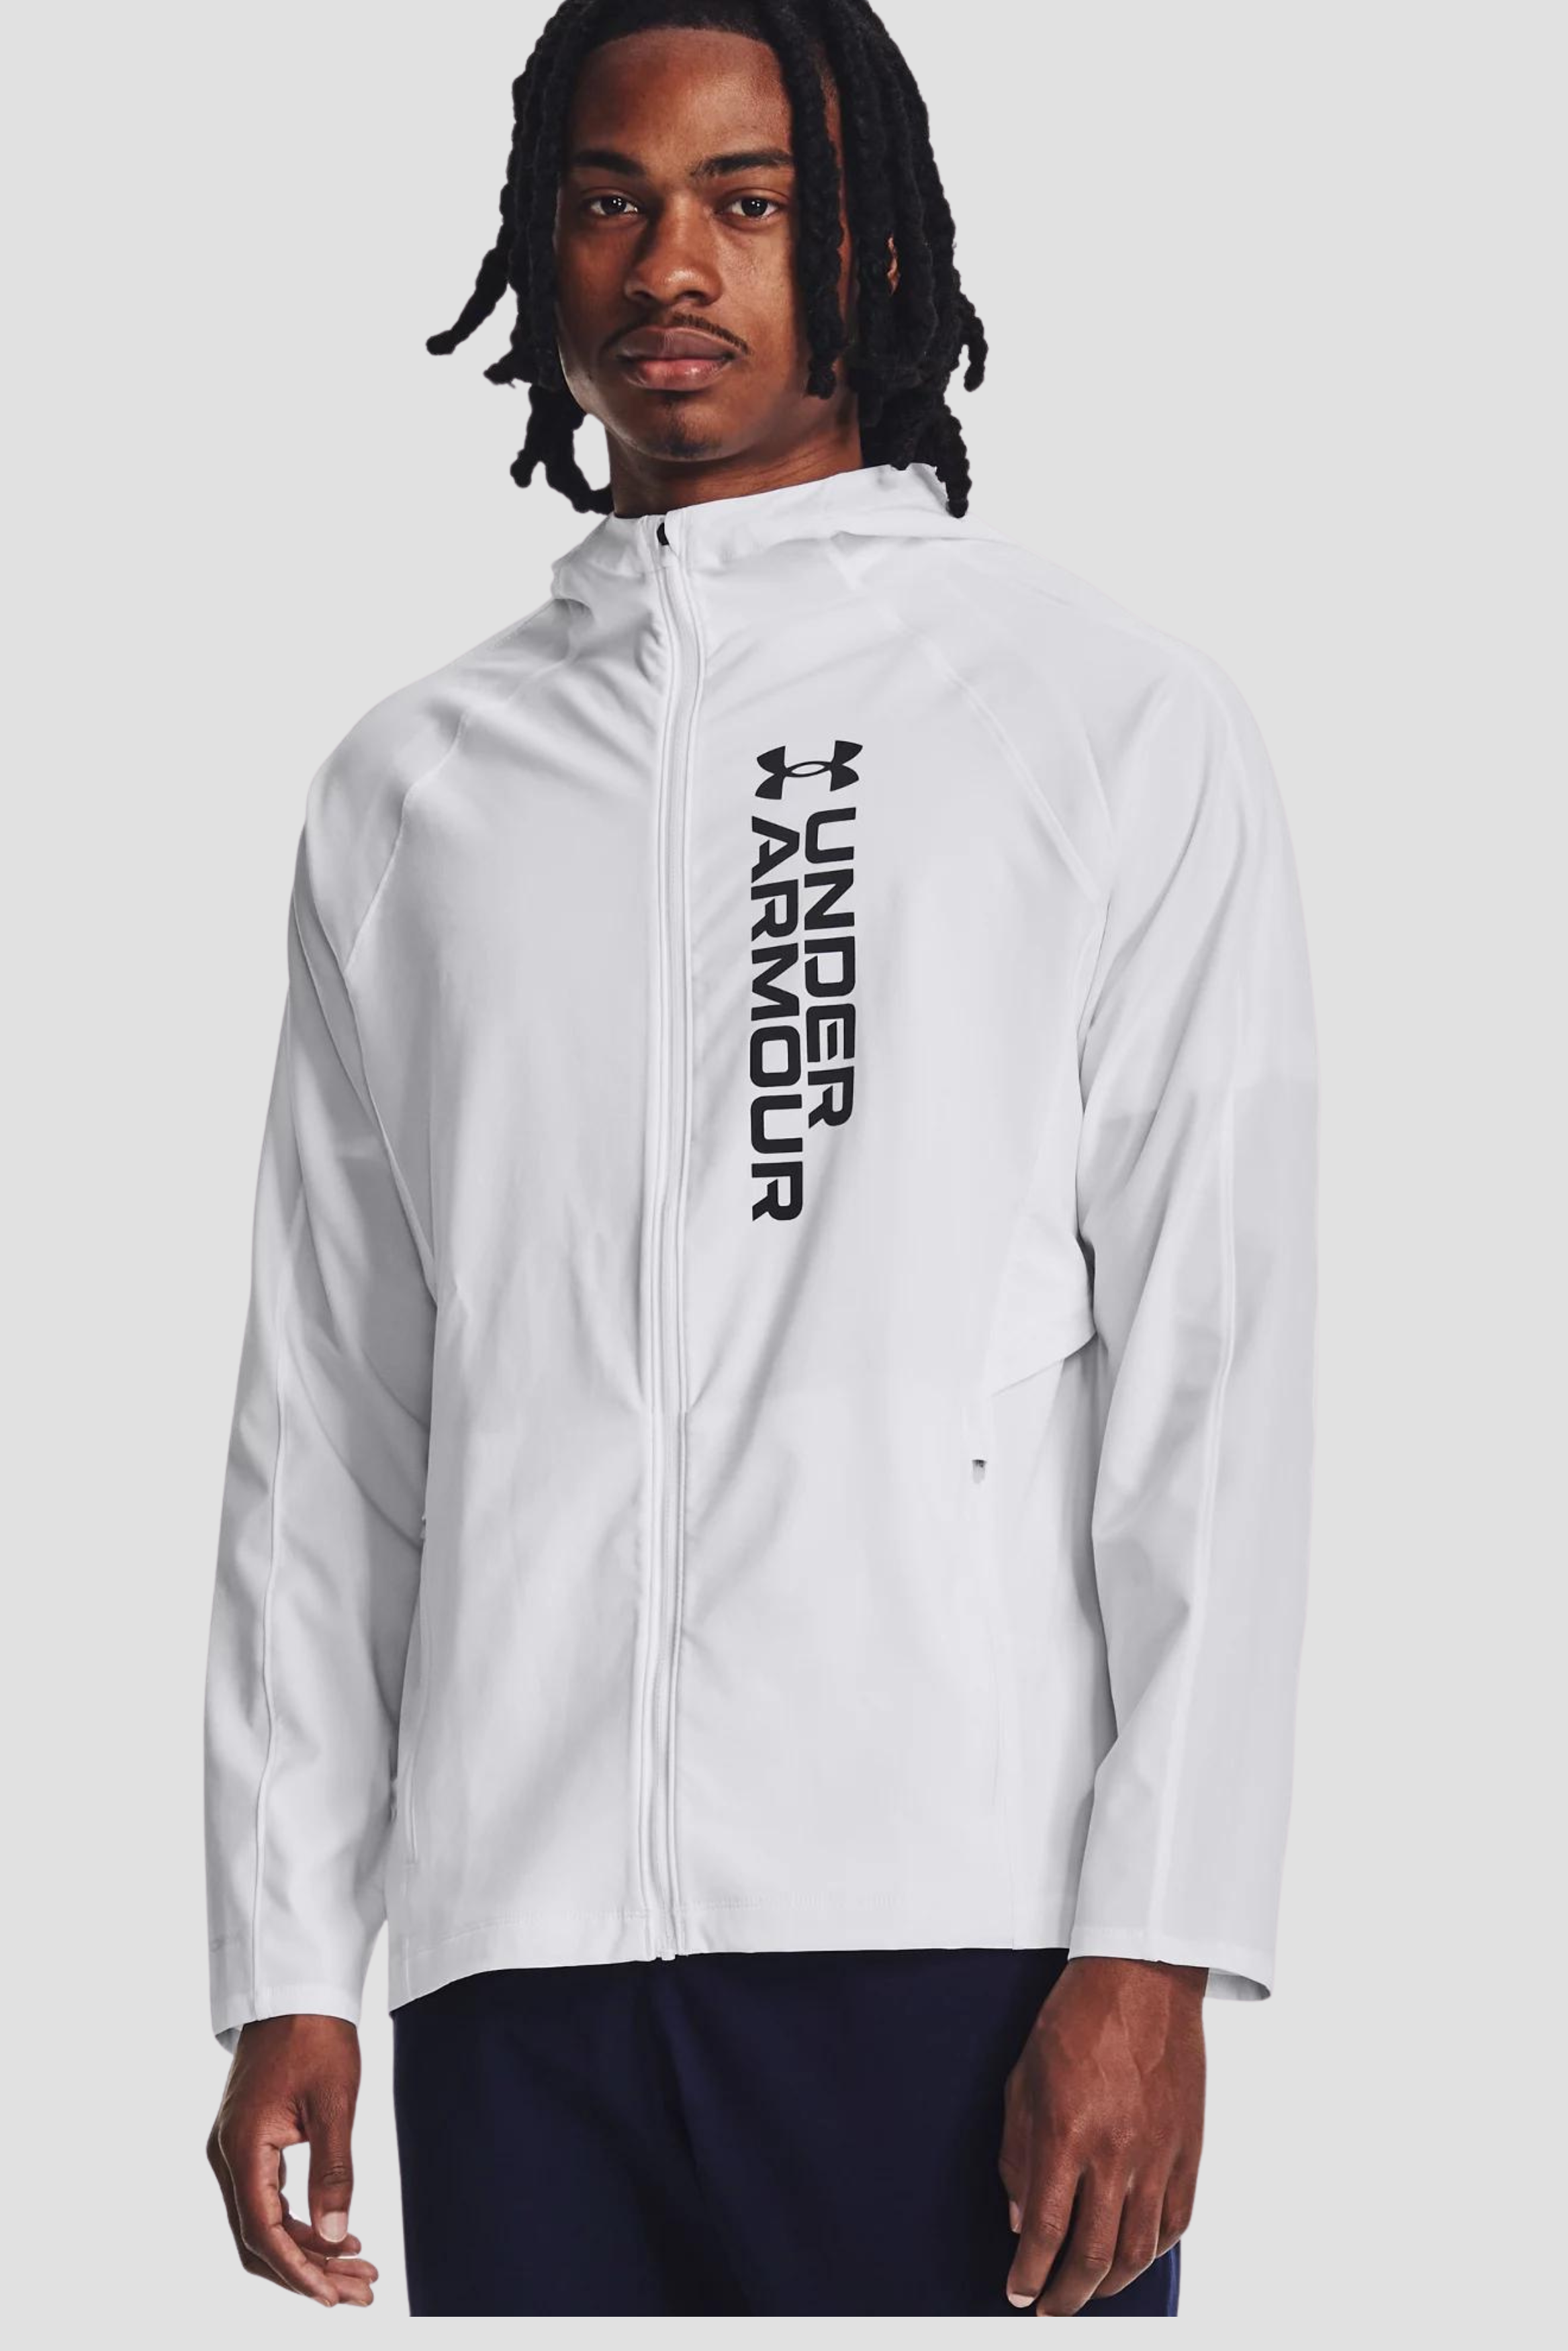 UNDER ARMOUR OUTRUN THE STORM JACKET 'WHITE'